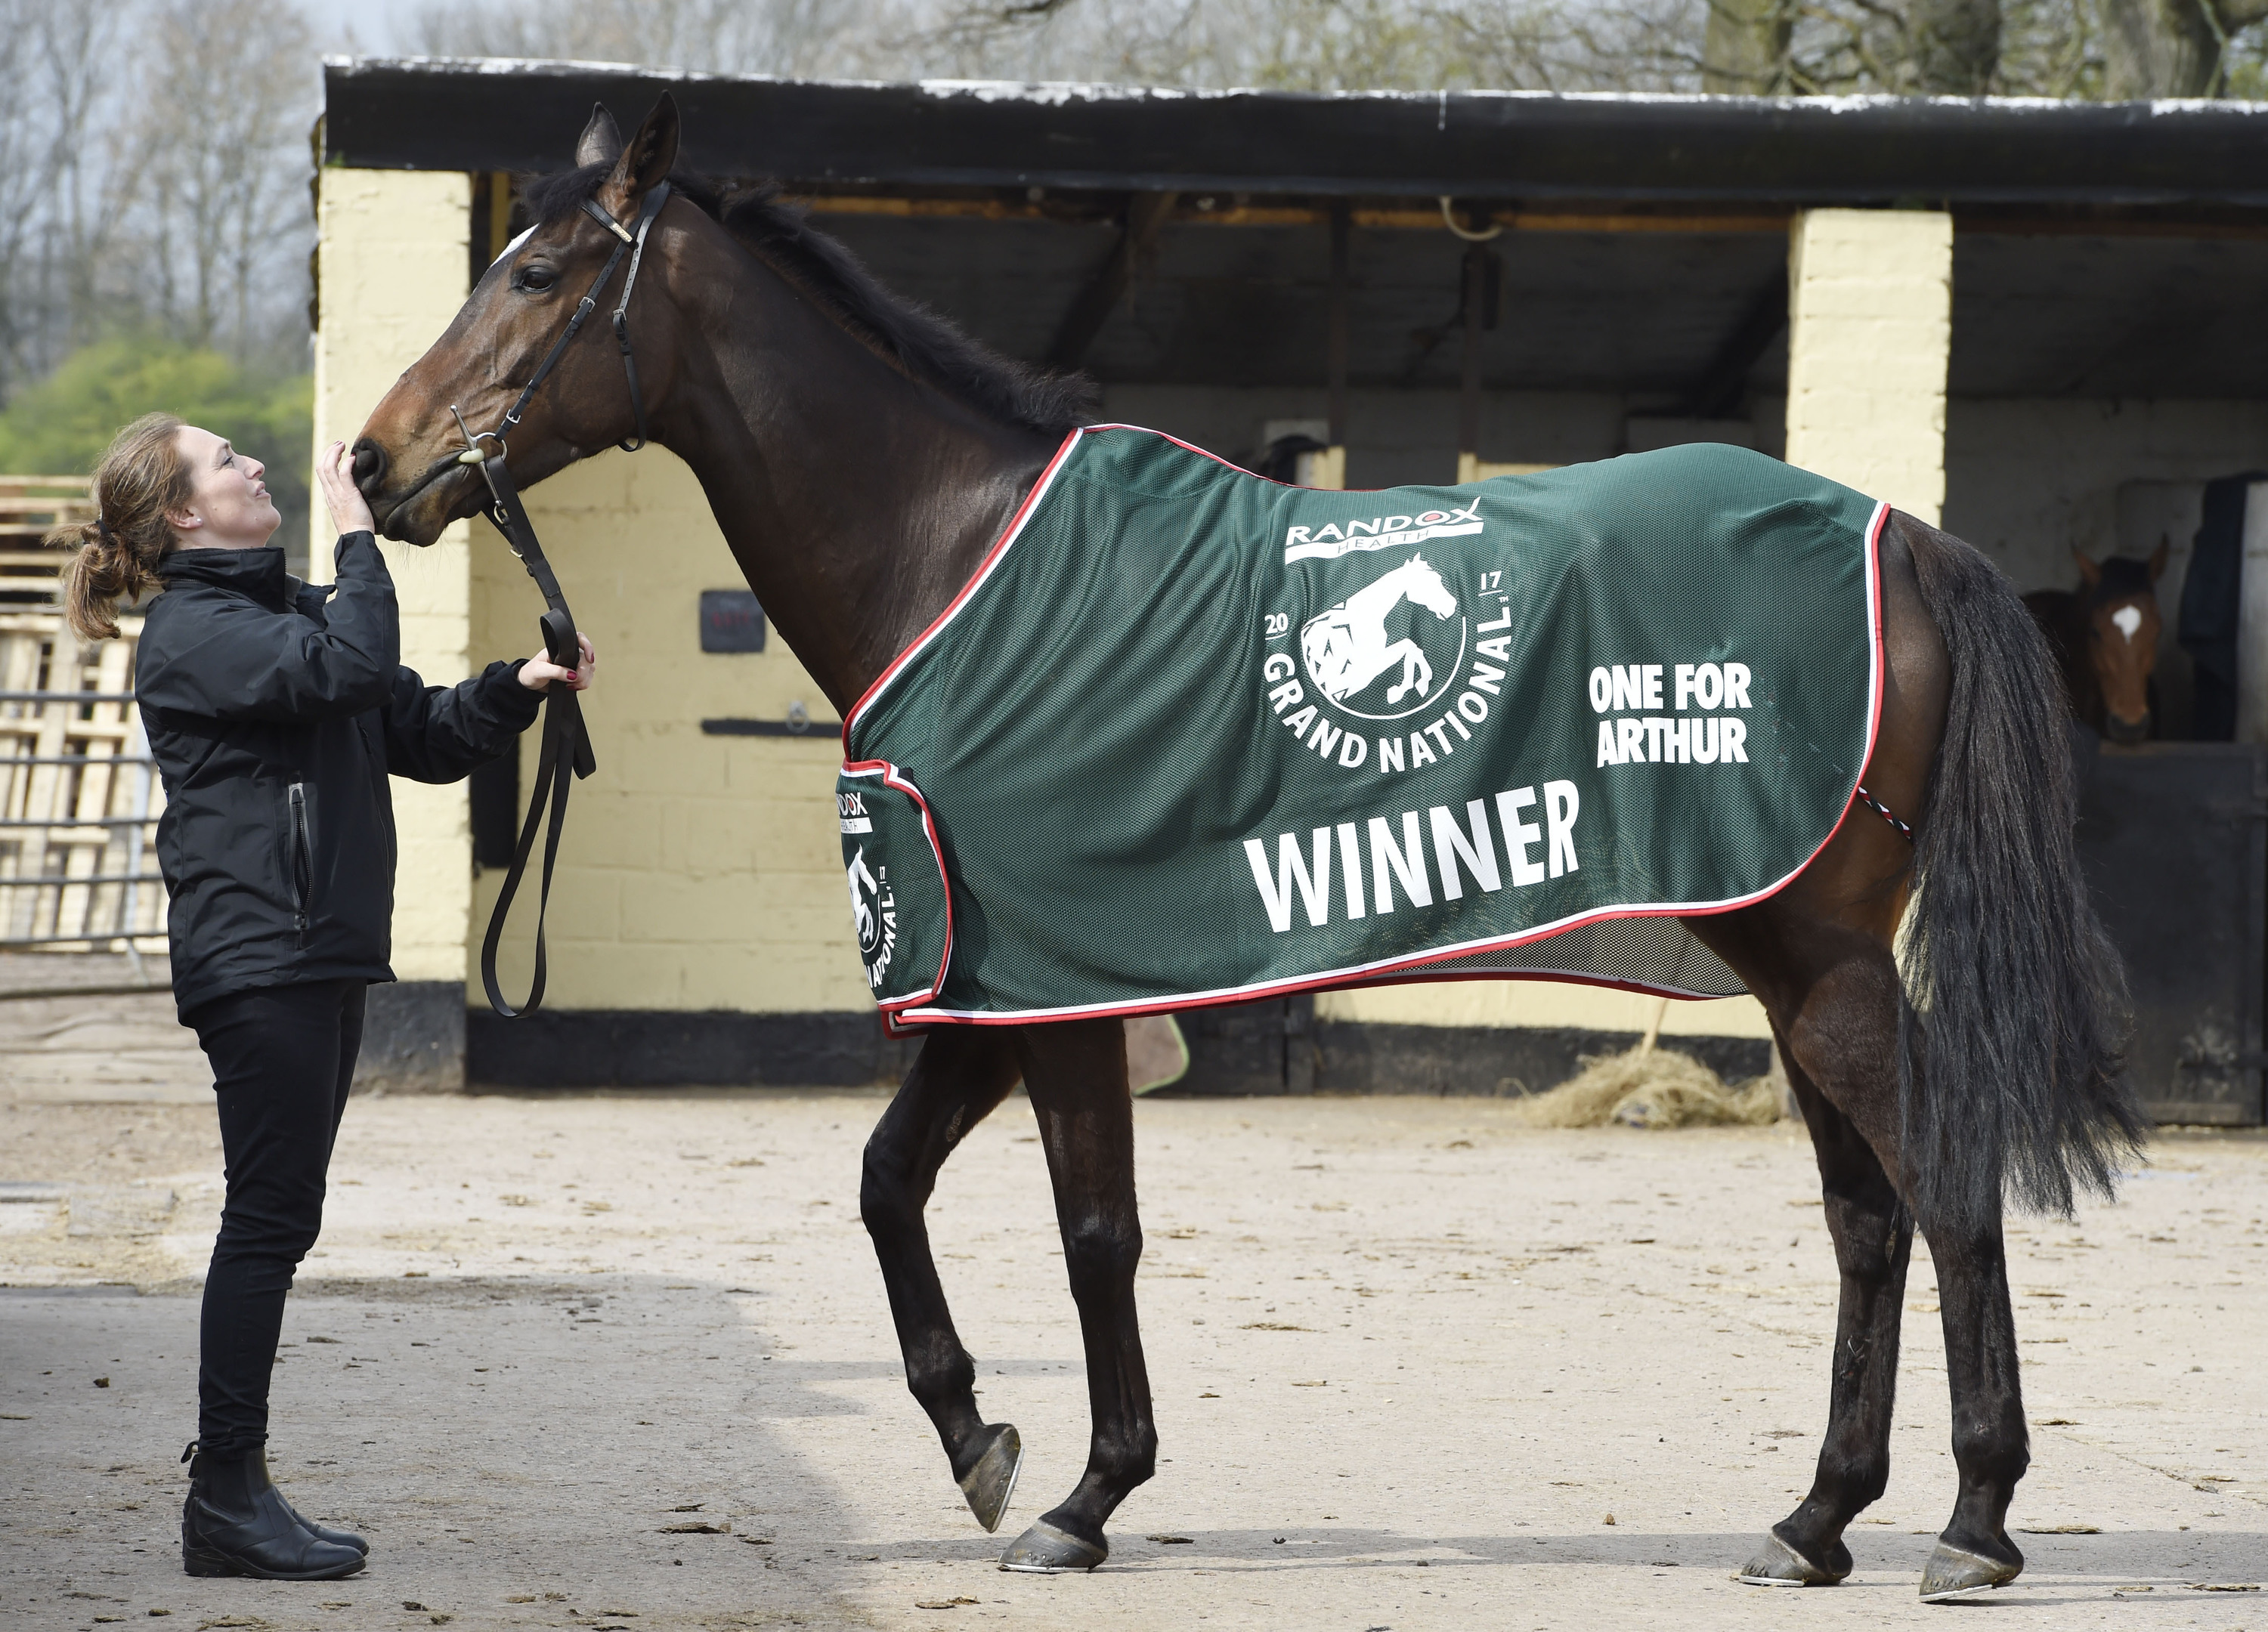 Grand National winner One For Arthur is paraded by stable girl Jaimie Duff.